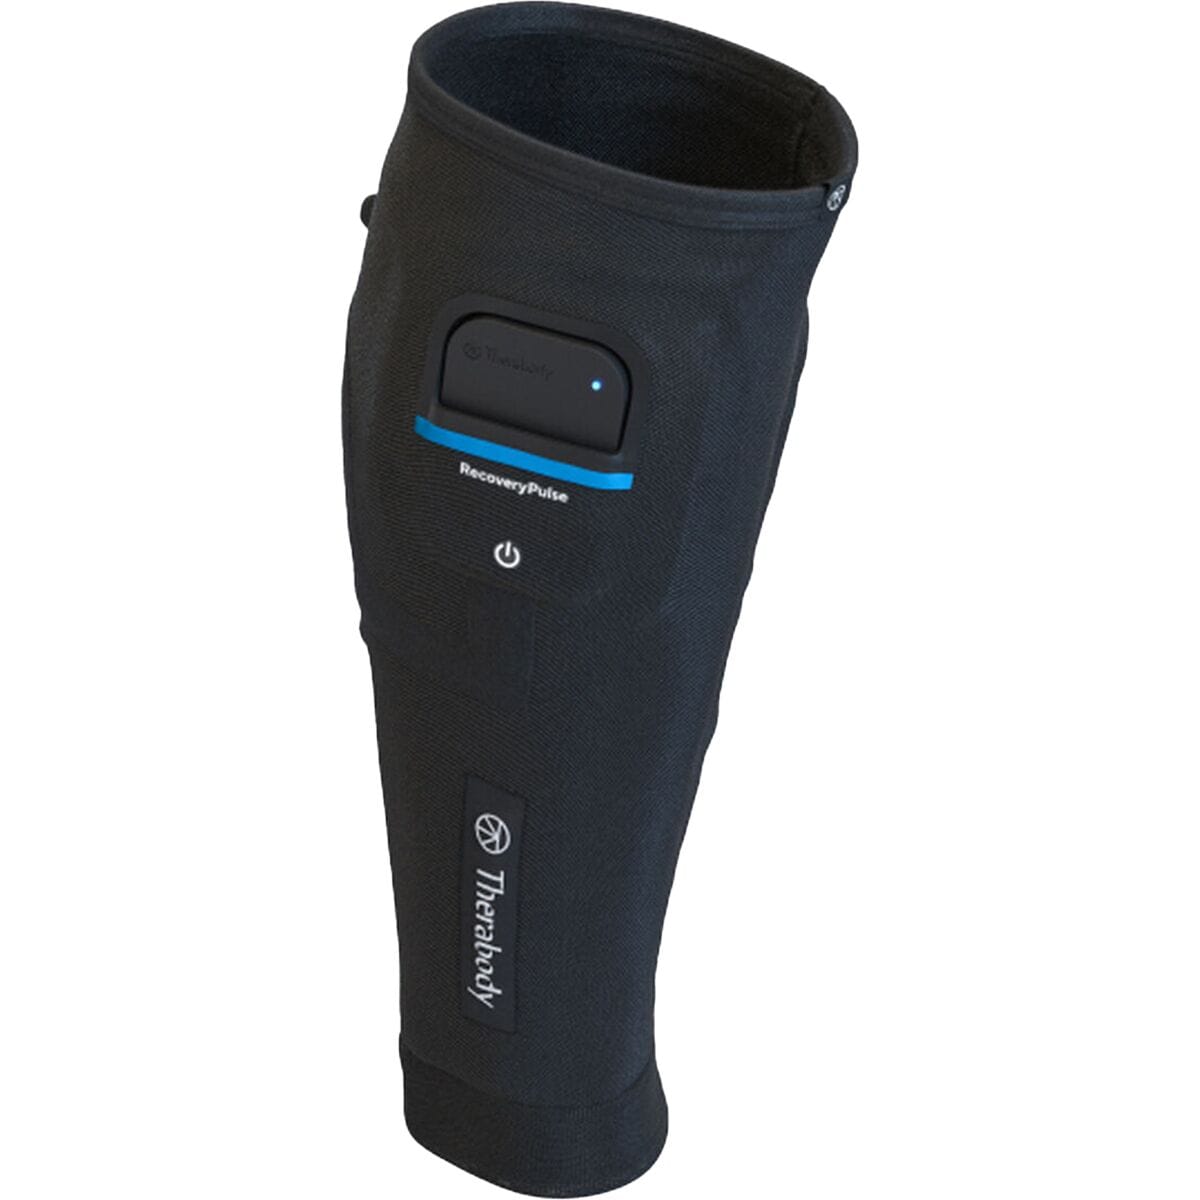 Therabody RecoveryPulse Calf - Accessories